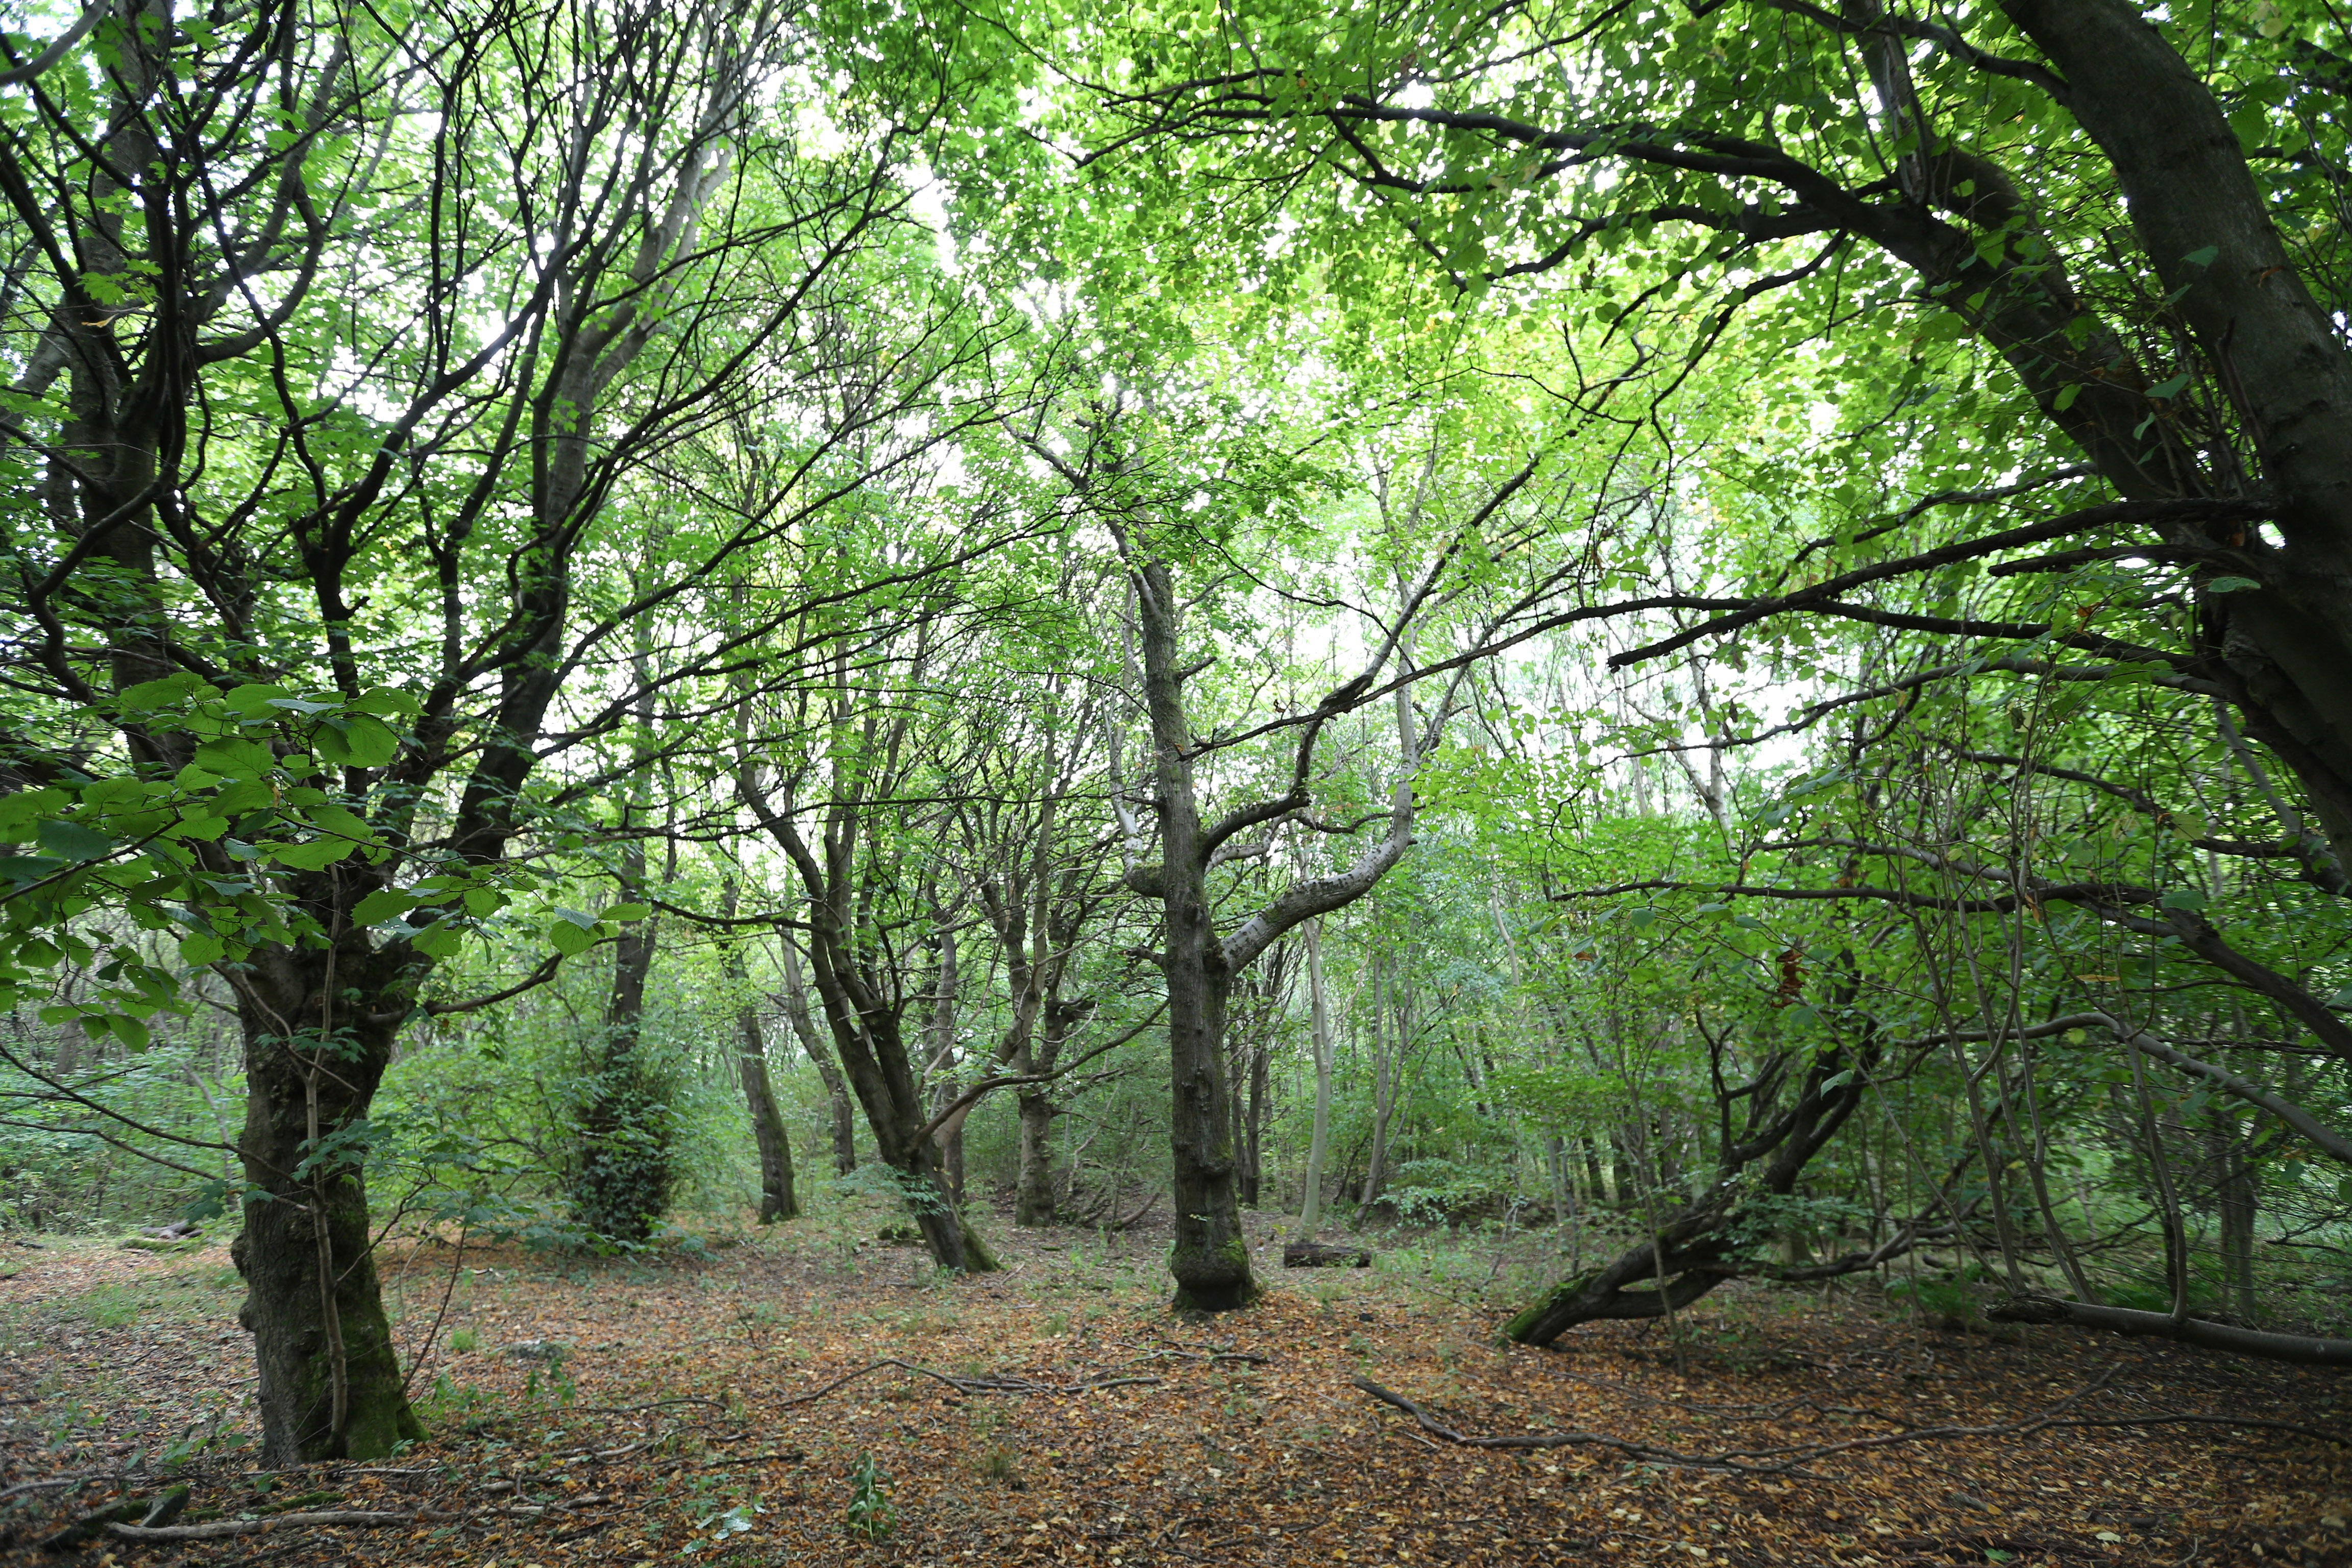 Survey shows tree-mendous support for forestry